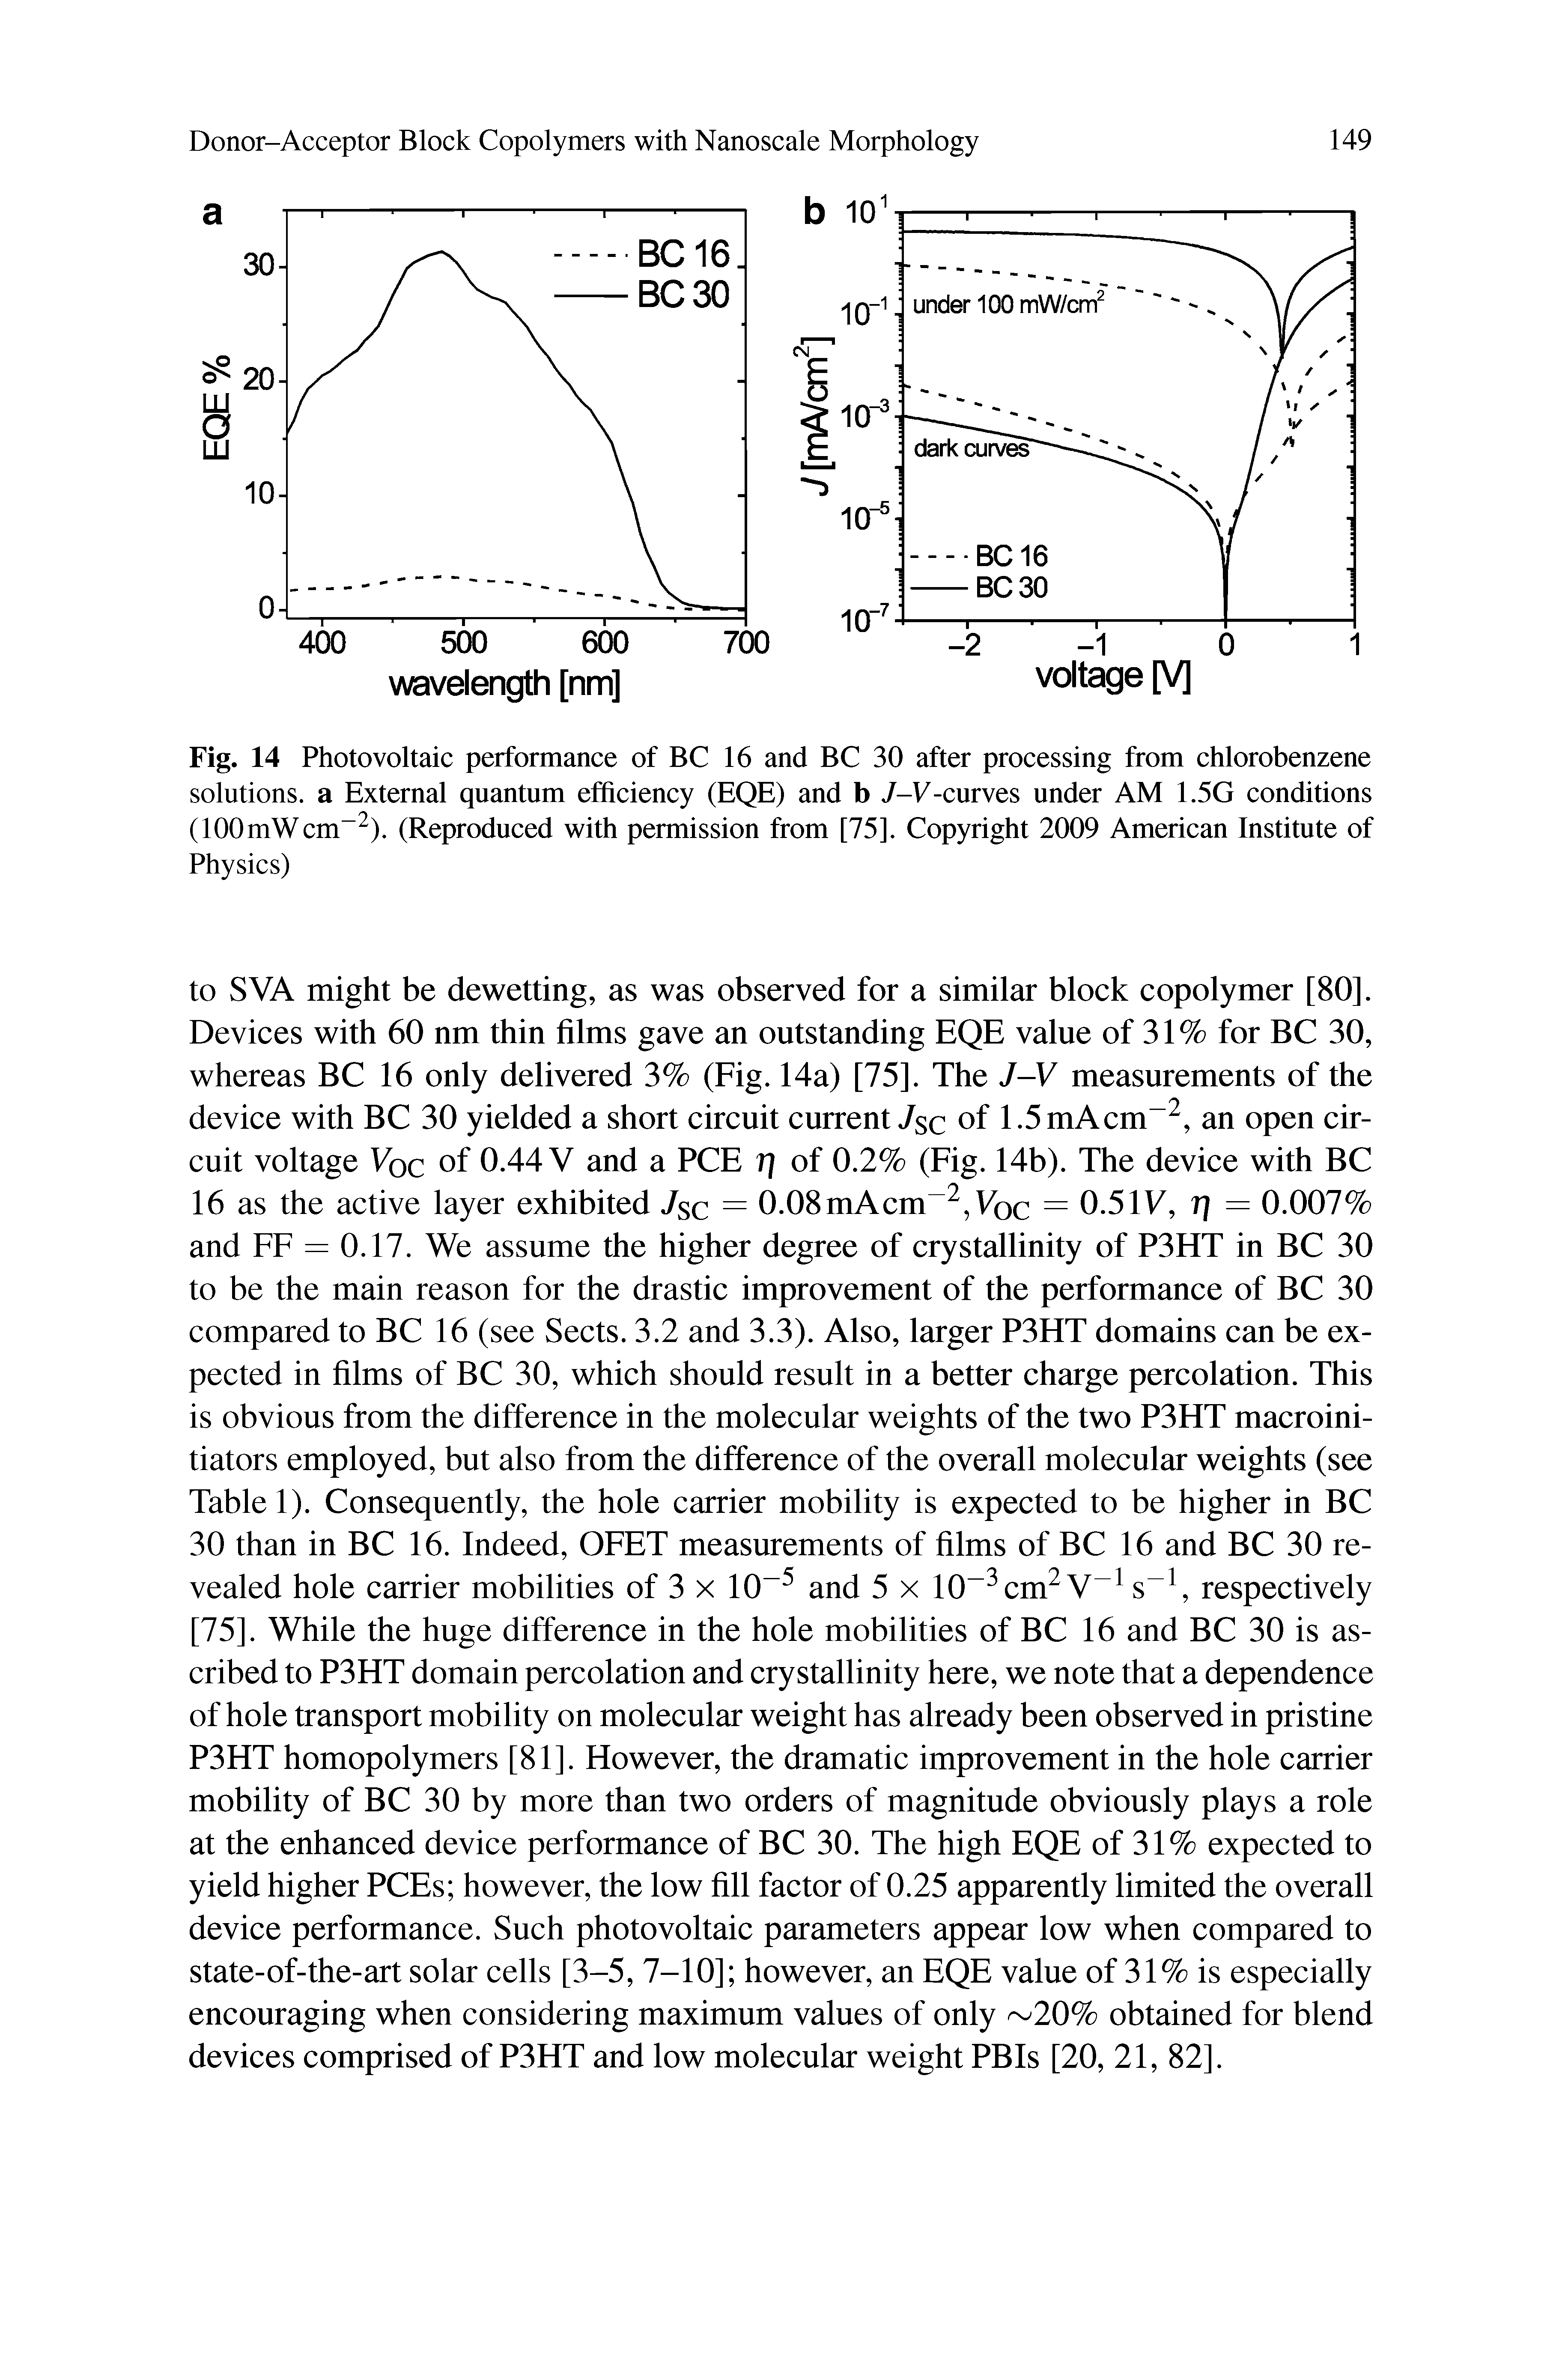 Fig. 14 Photovoltaic performance of BC 16 and BC 30 after processing from chlorobenzene solutions, a External quantum efficiency (EQE) and b 7-V-curves under AM 1.5G conditions (lOOmWcm-2). (Reproduced with permission from [75]. Copyright 2009 American Institute of...